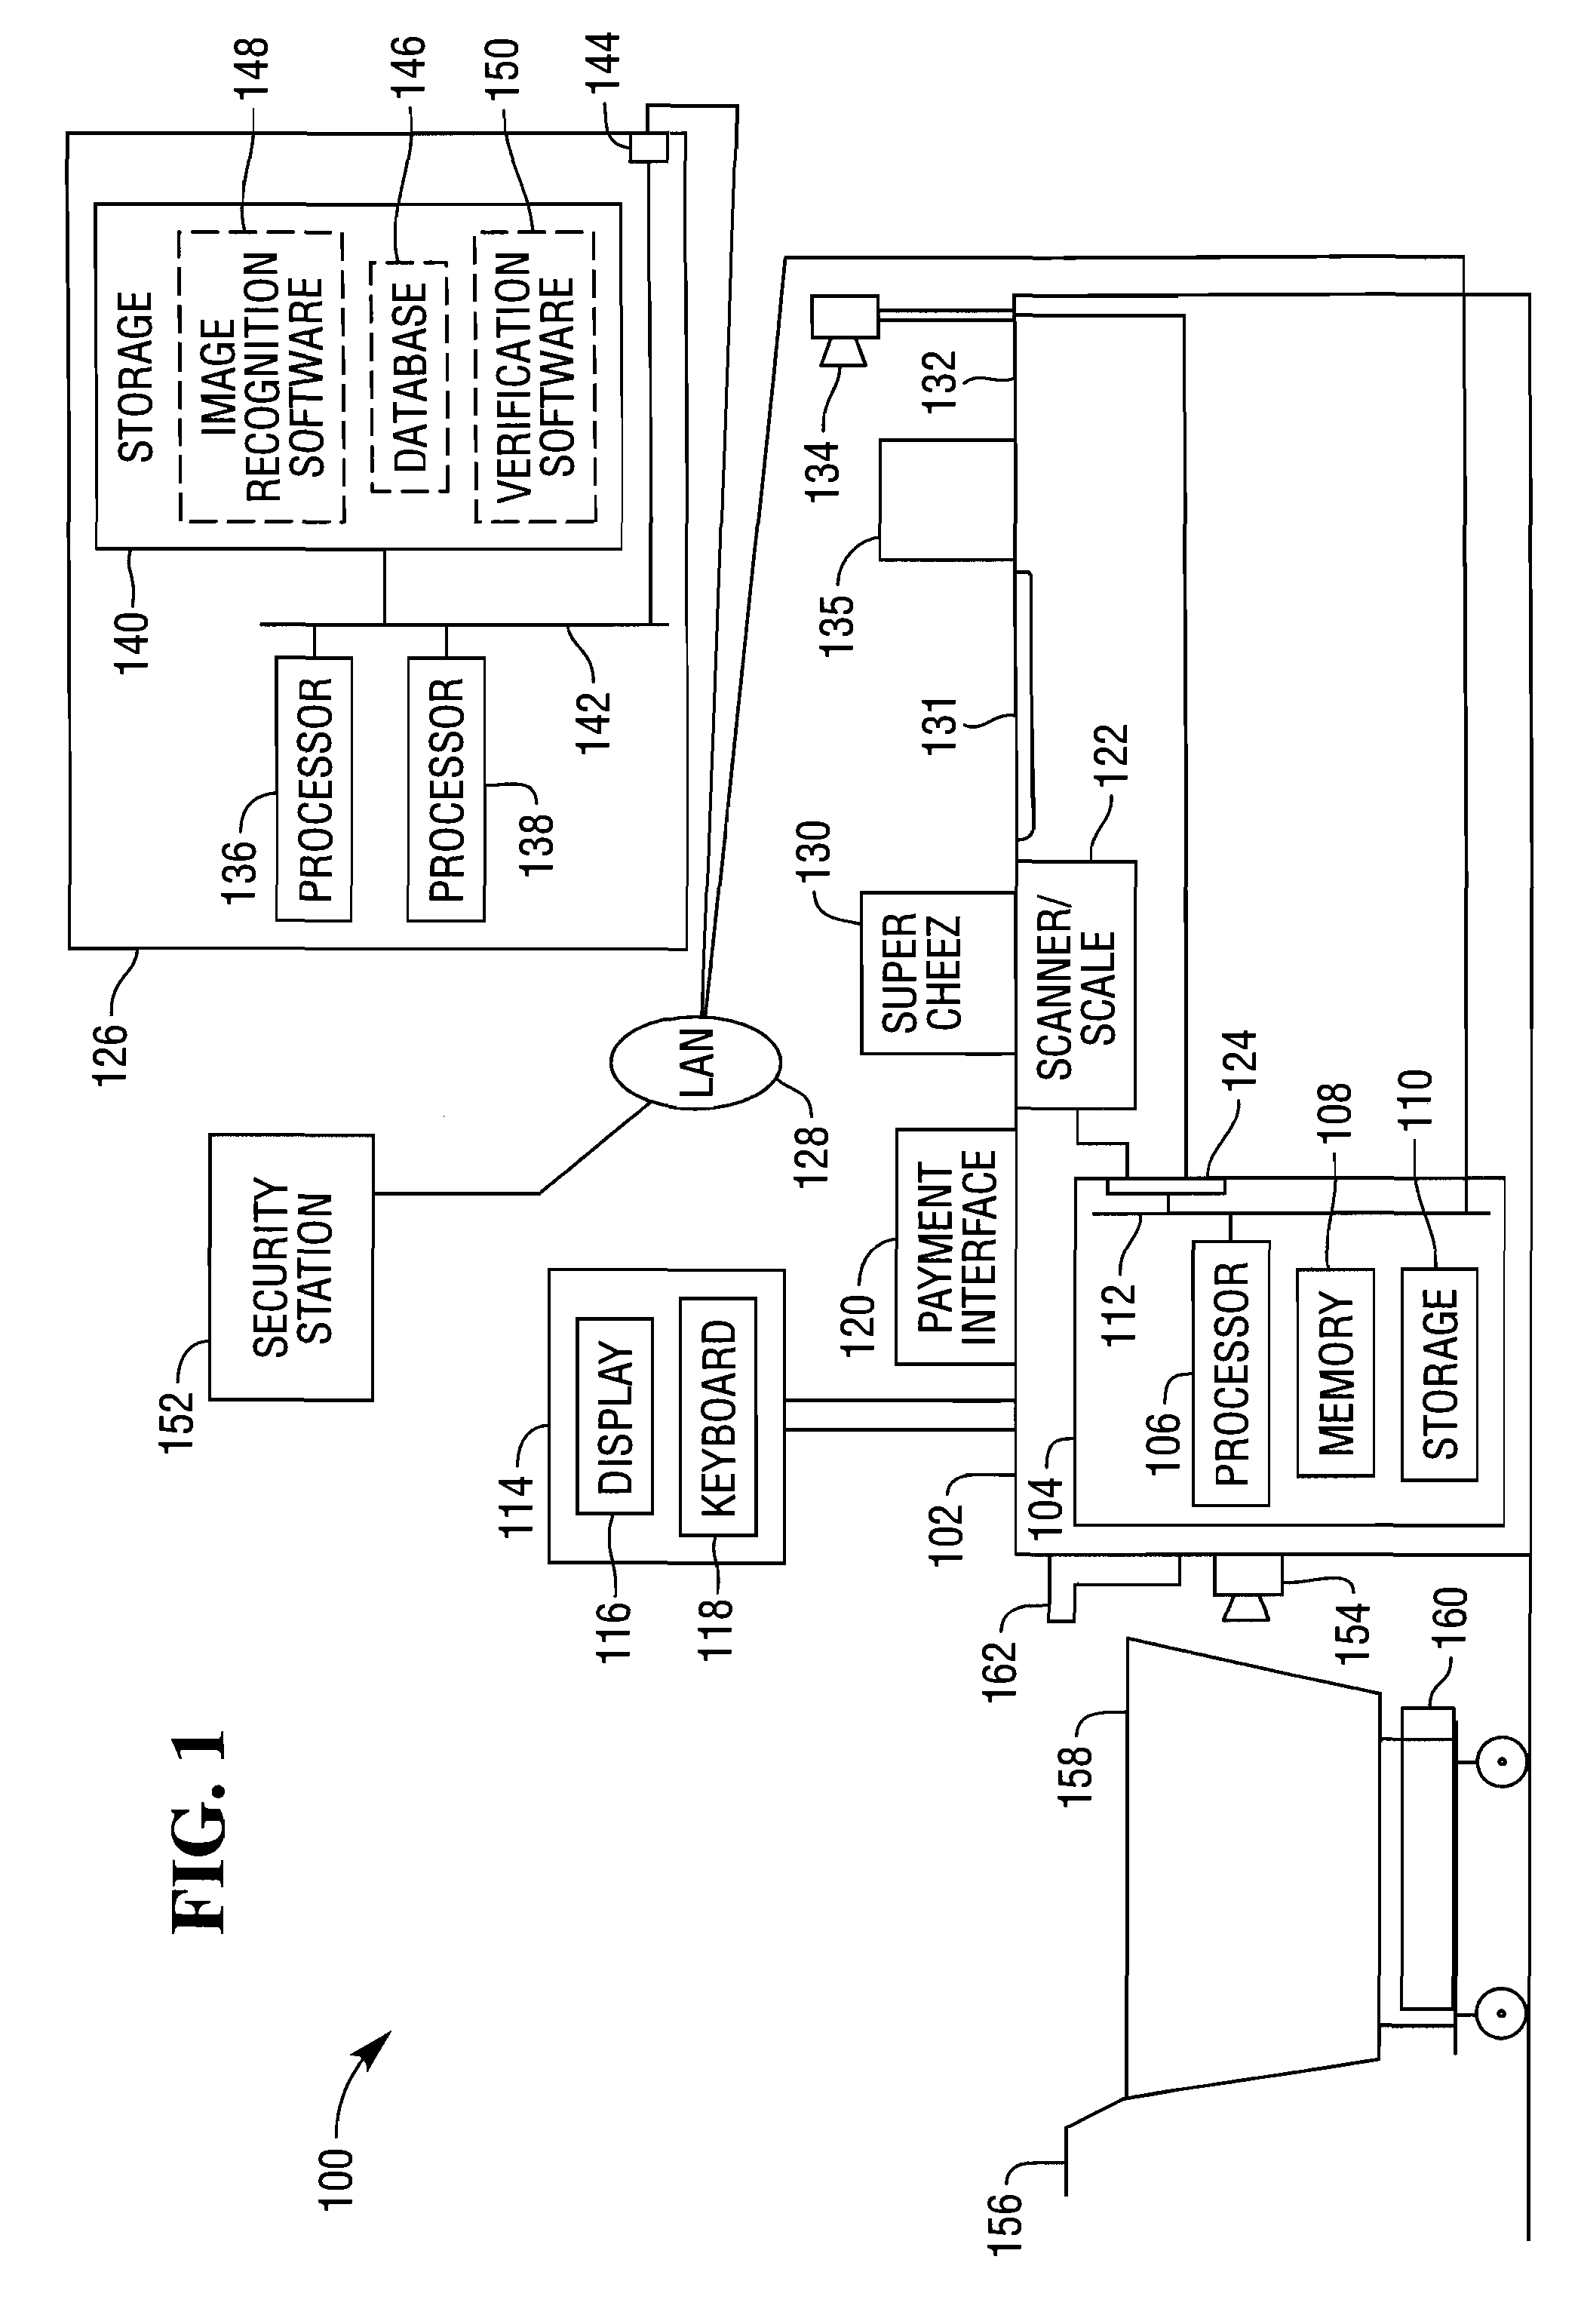 Methods and Apparatus for Image Recognition in Checkout Verification